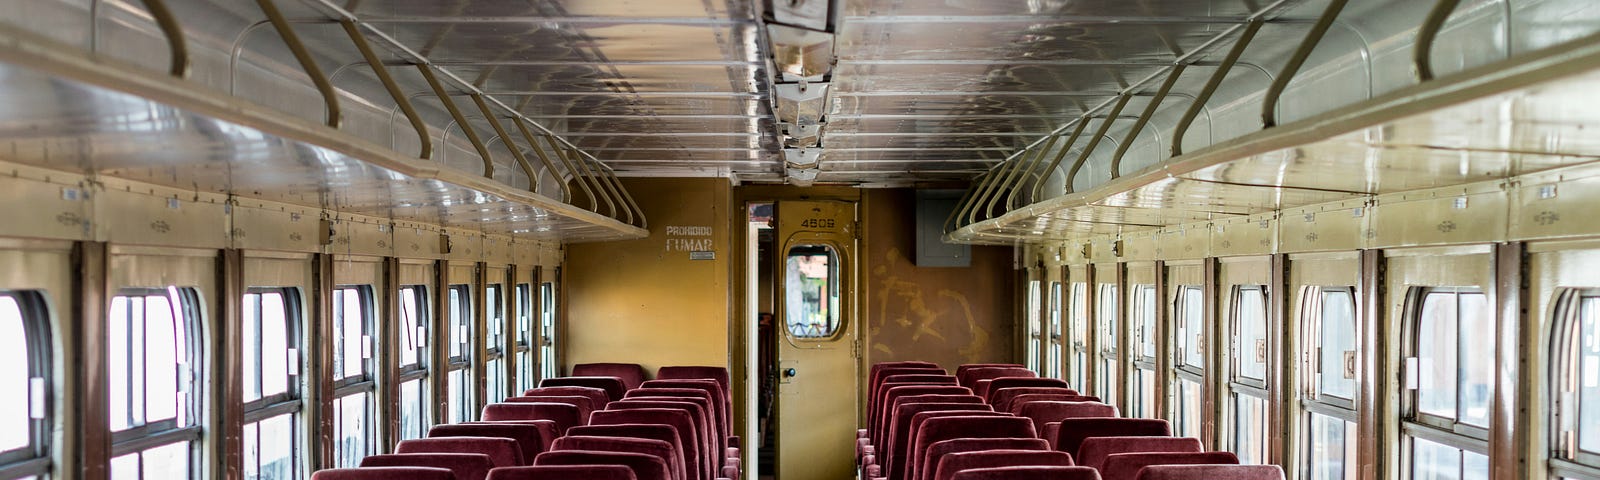 A bus with vacant seats